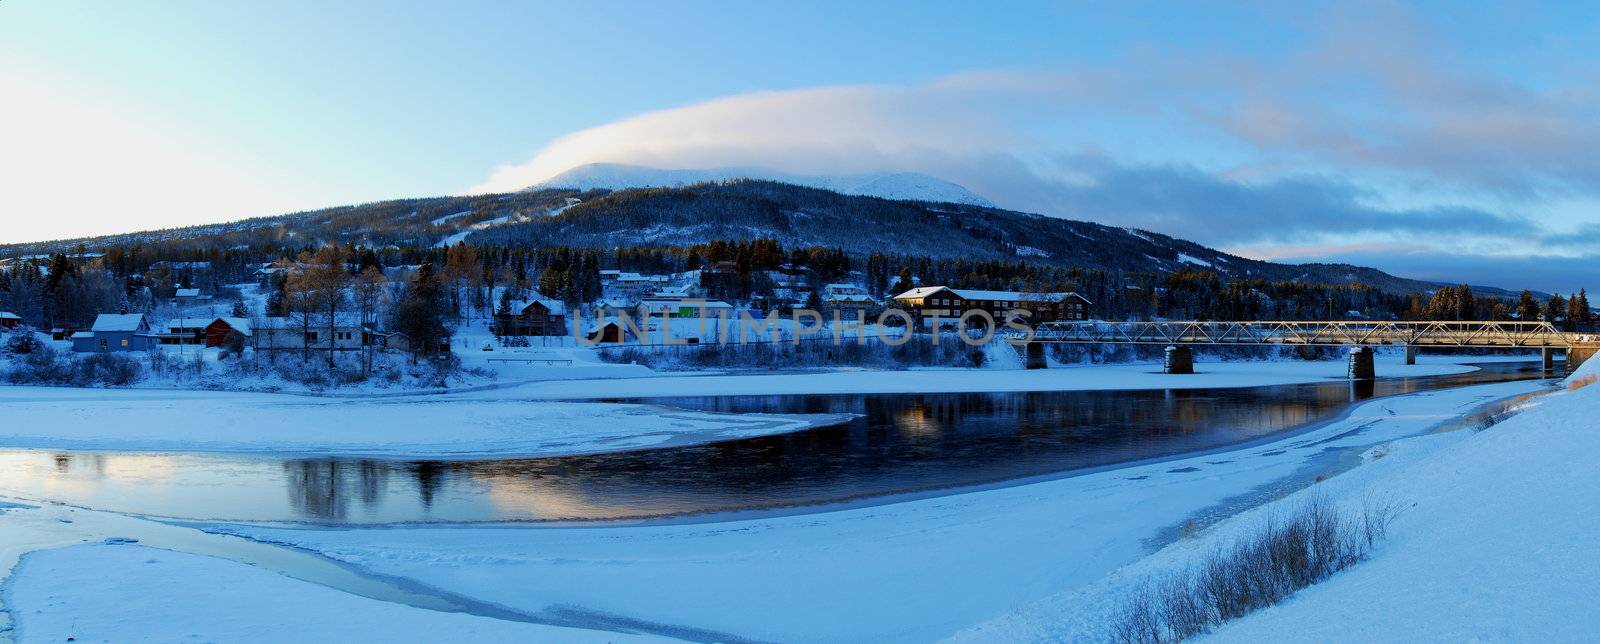 Evening view the bridge across the river and mountain. Winter in Trysil. by teus